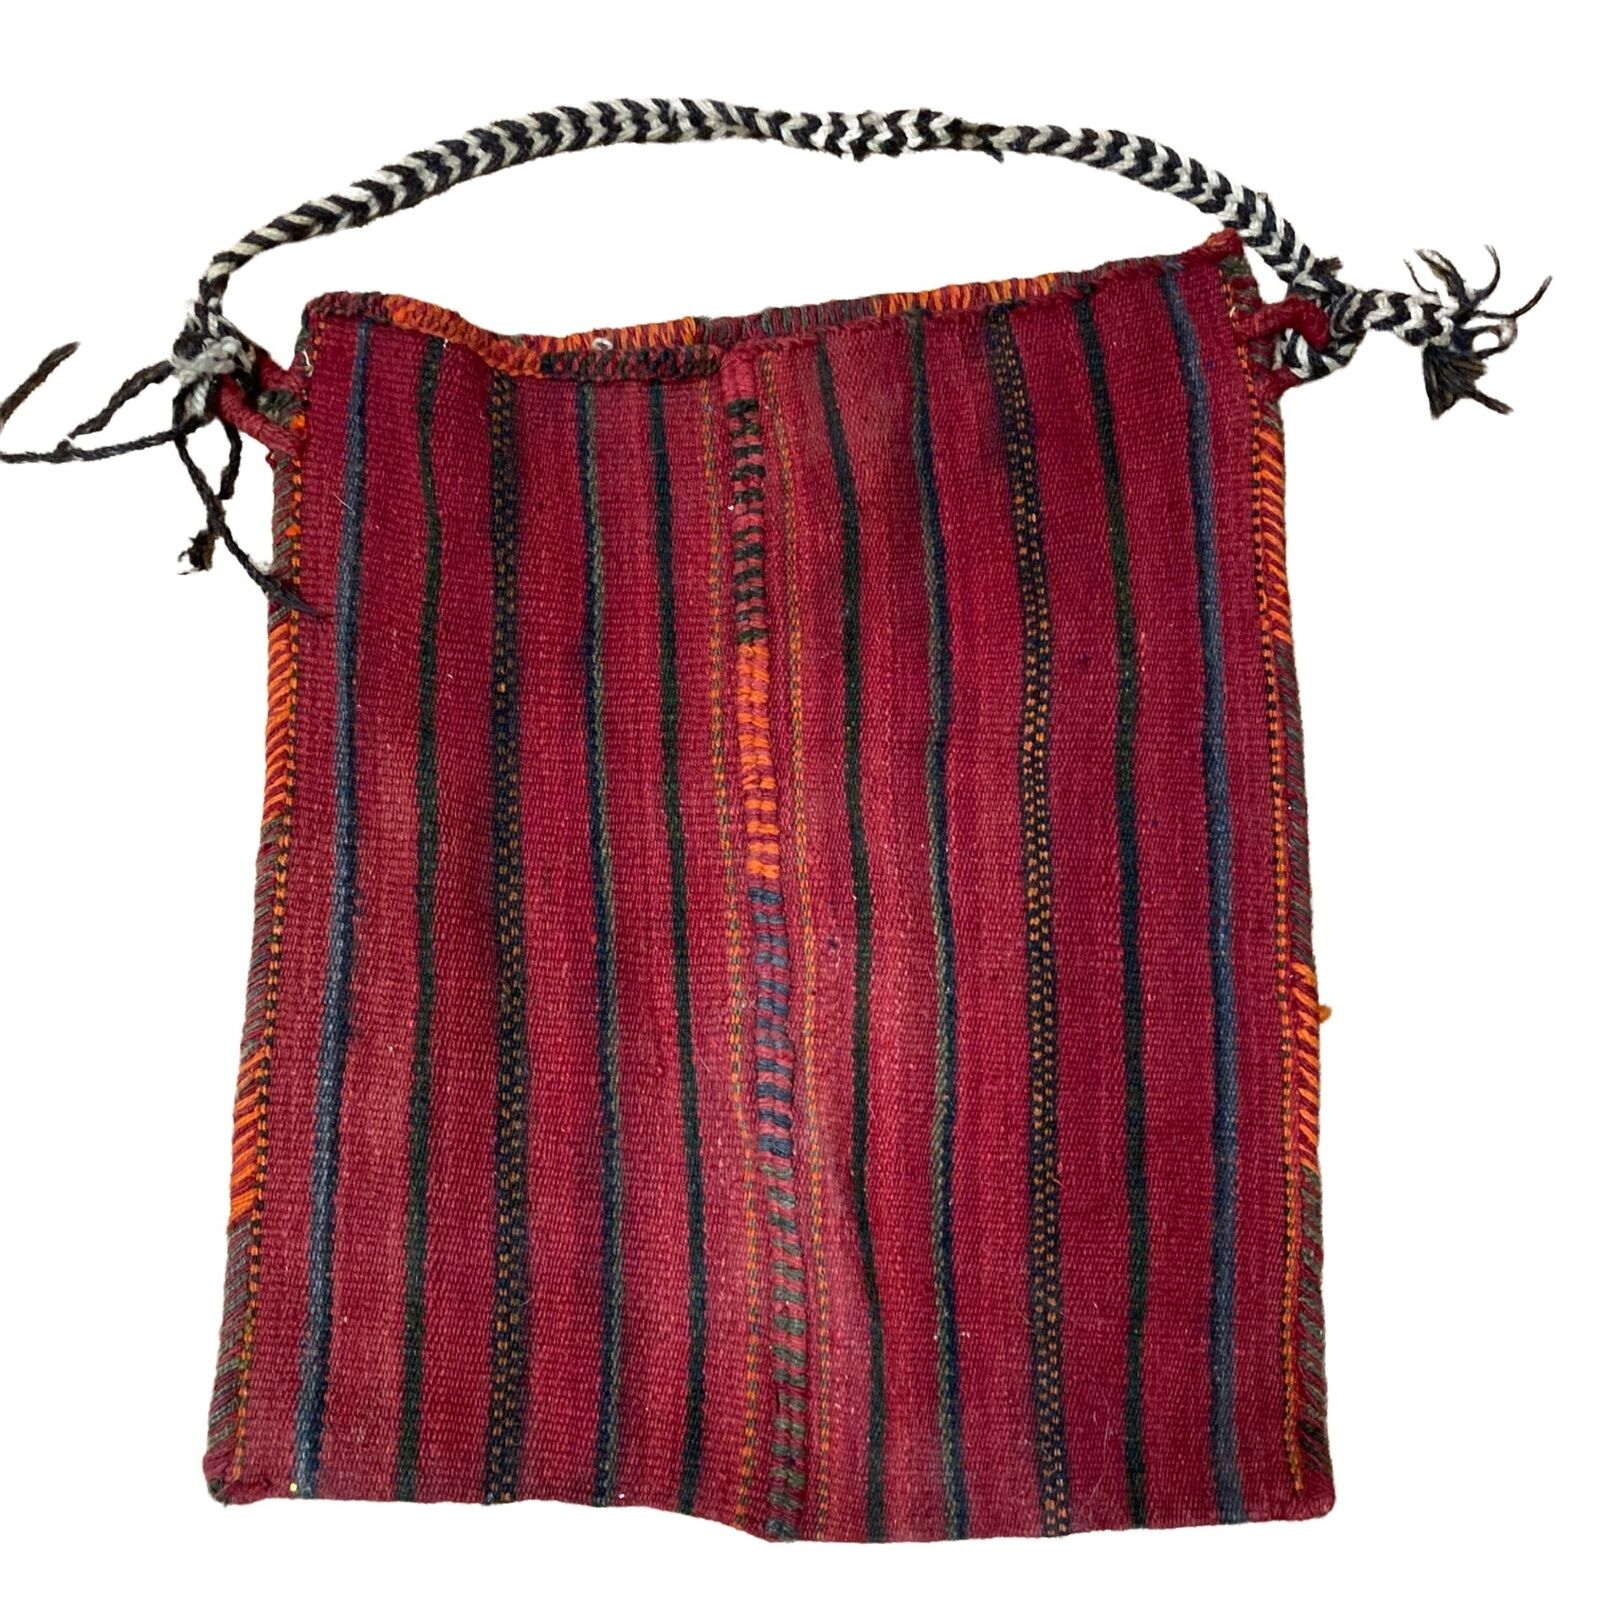 Bedouin Egyptian Wool Camel Carry Bag Vintage as is Tapestry